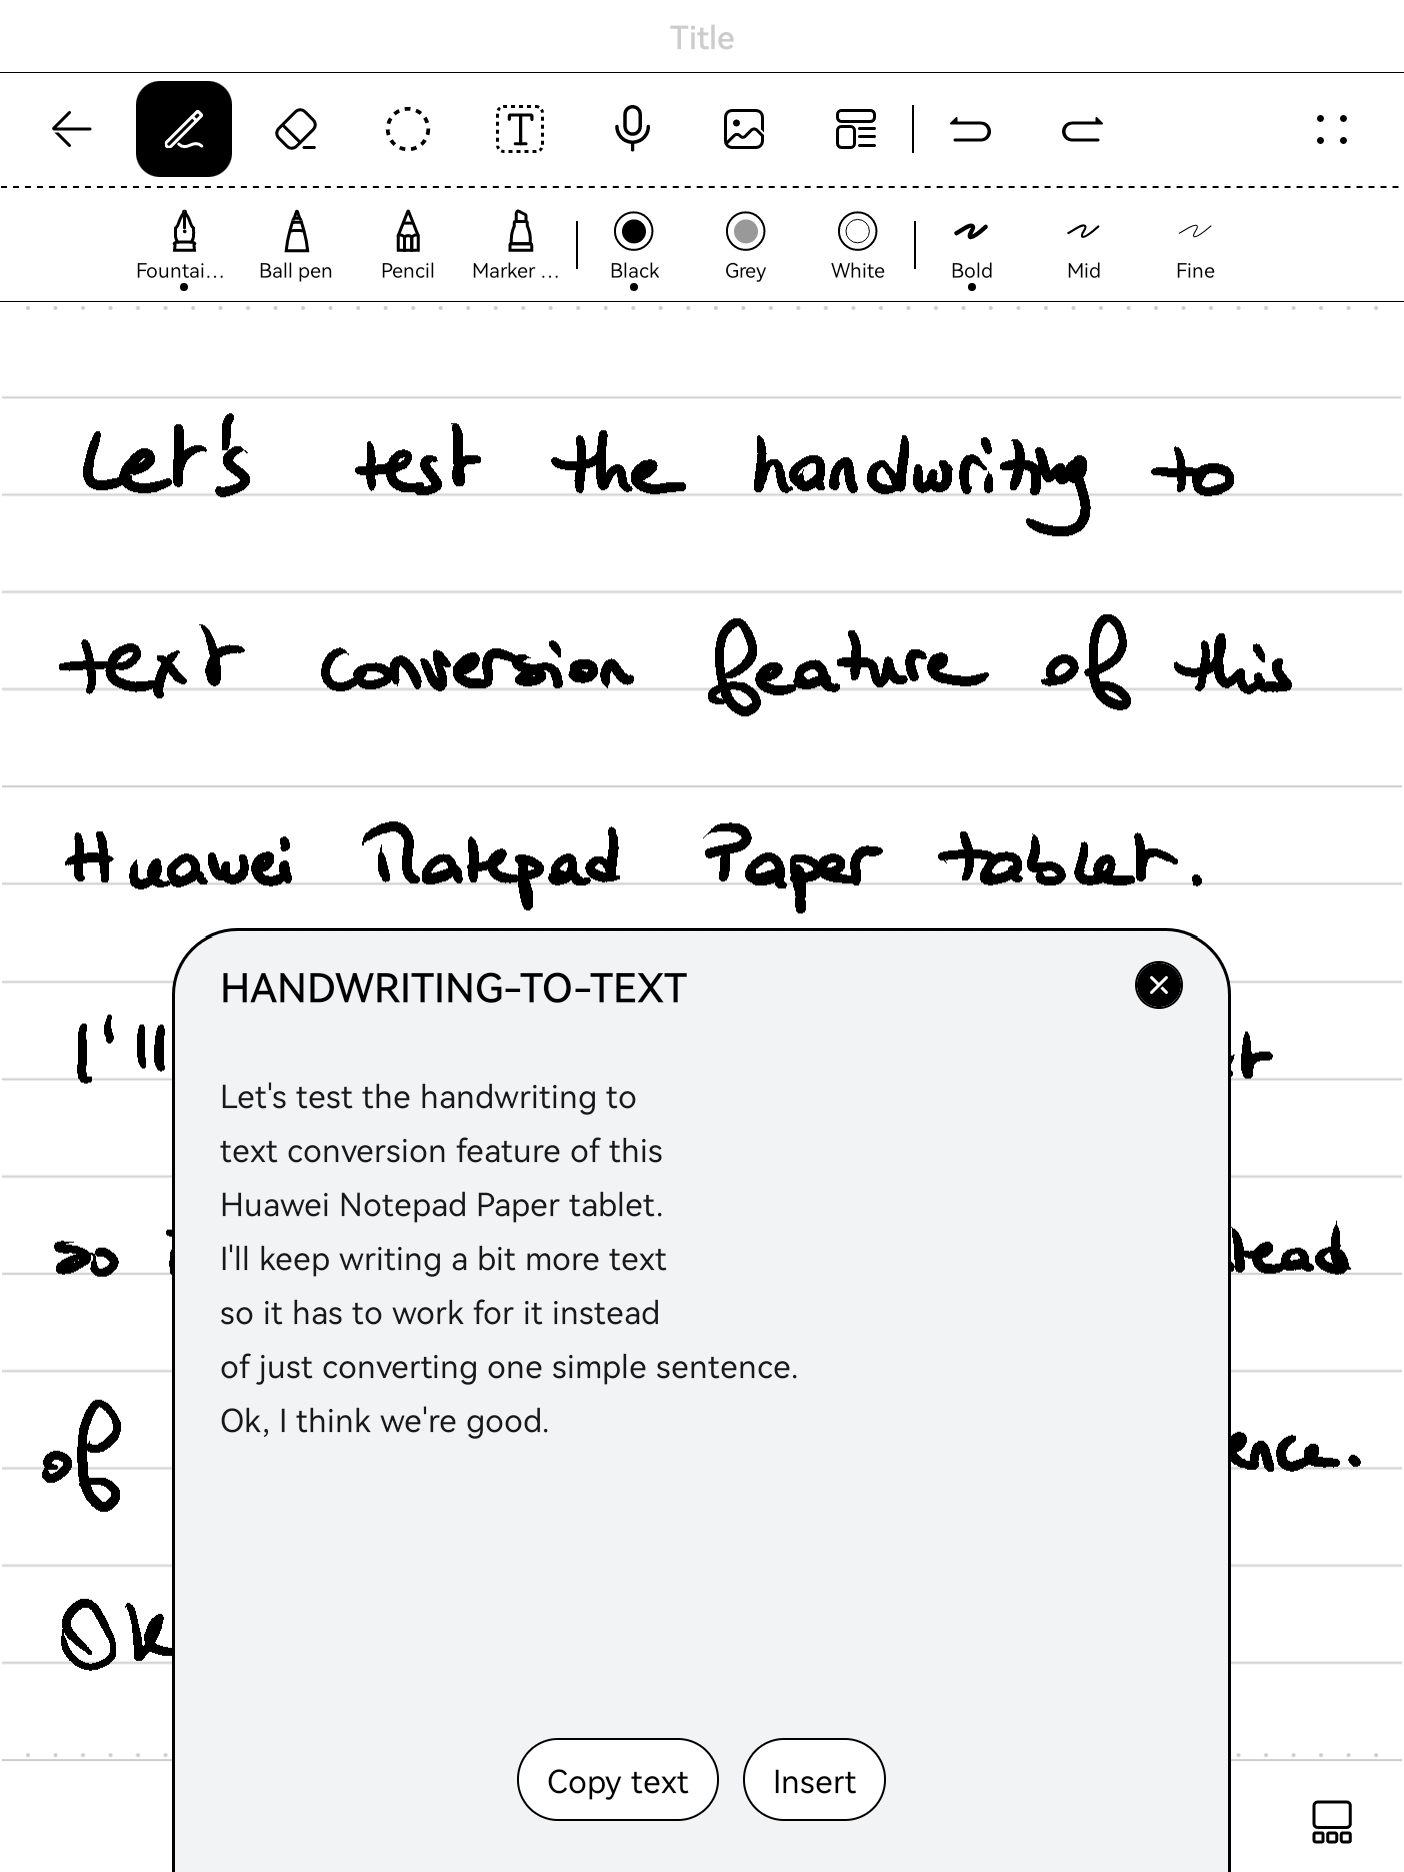 Huawei MatePad Paper handwritten note transcribed to text